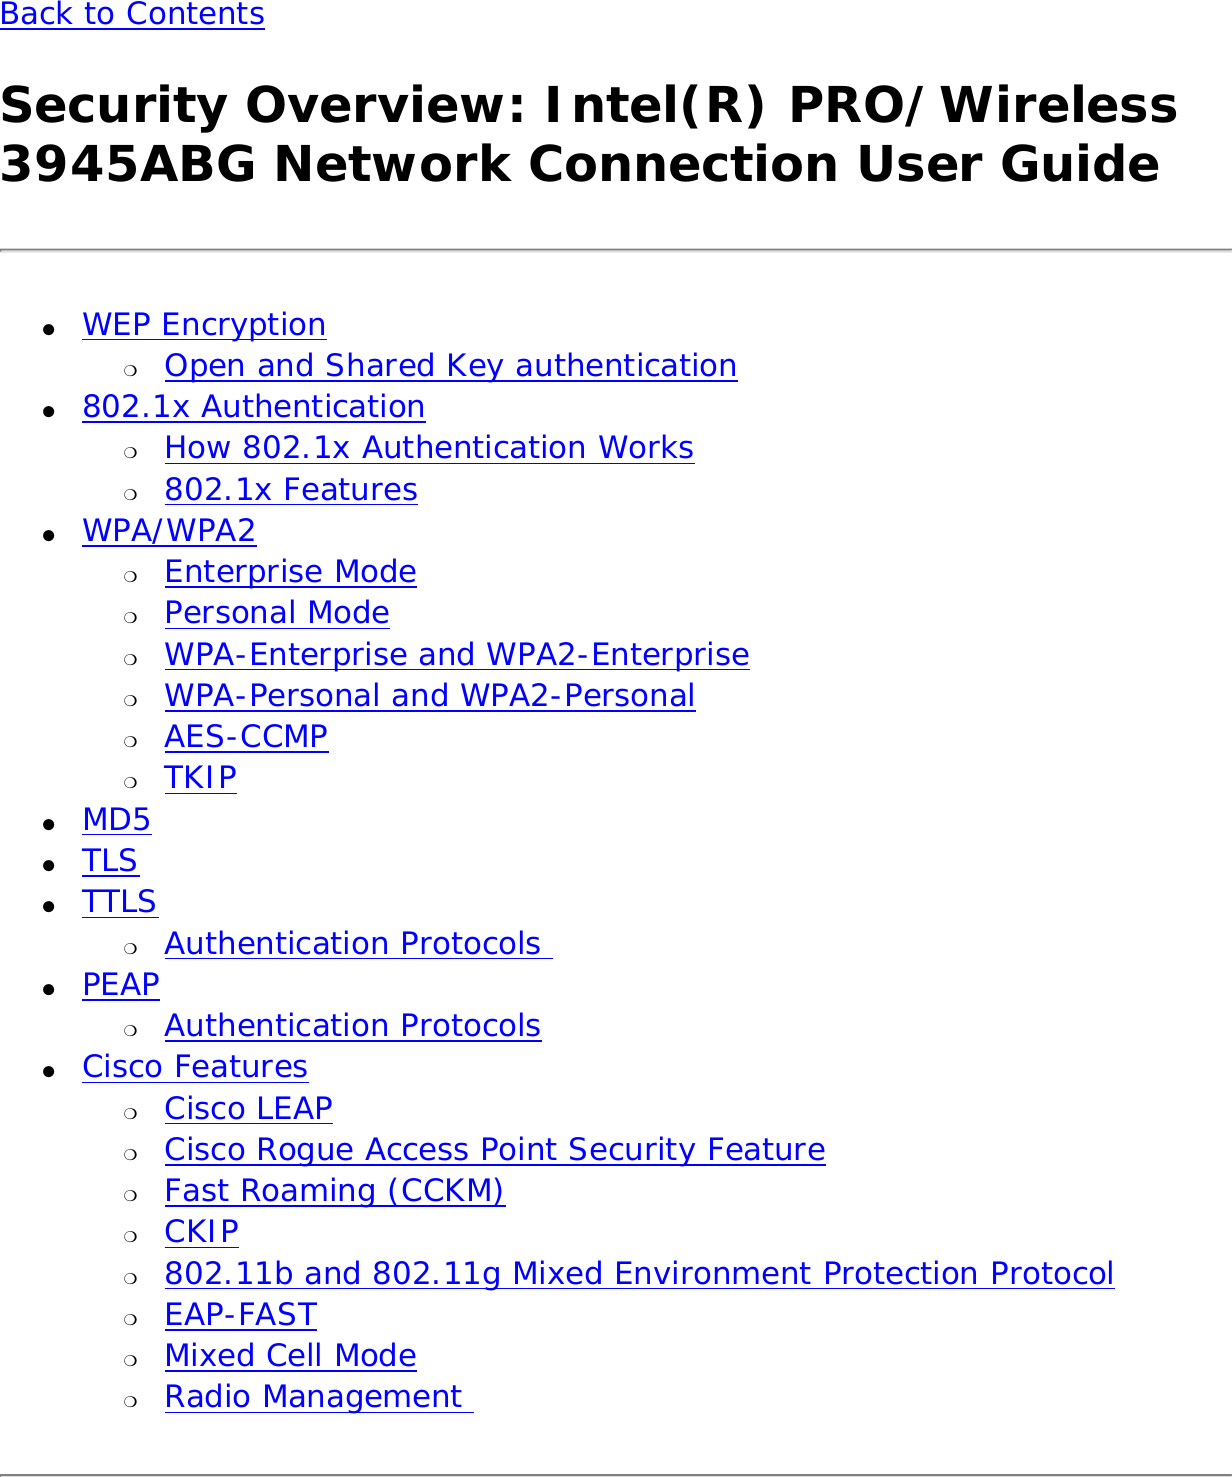 Back to Contents Security Overview: Intel(R) PRO/Wireless 3945ABG Network Connection User Guide●     WEP Encryption ❍     Open and Shared Key authentication●     802.1x Authentication ❍     How 802.1x Authentication Works❍     802.1x Features●     WPA/WPA2 ❍     Enterprise Mode❍     Personal Mode❍     WPA-Enterprise and WPA2-Enterprise ❍     WPA-Personal and WPA2-Personal ❍     AES-CCMP❍     TKIP●     MD5●     TLS●     TTLS ❍     Authentication Protocols ●     PEAP ❍     Authentication Protocols●     Cisco Features ❍     Cisco LEAP❍     Cisco Rogue Access Point Security Feature❍     Fast Roaming (CCKM)❍     CKIP❍     802.11b and 802.11g Mixed Environment Protection Protocol❍     EAP-FAST❍     Mixed Cell Mode❍     Radio Management 